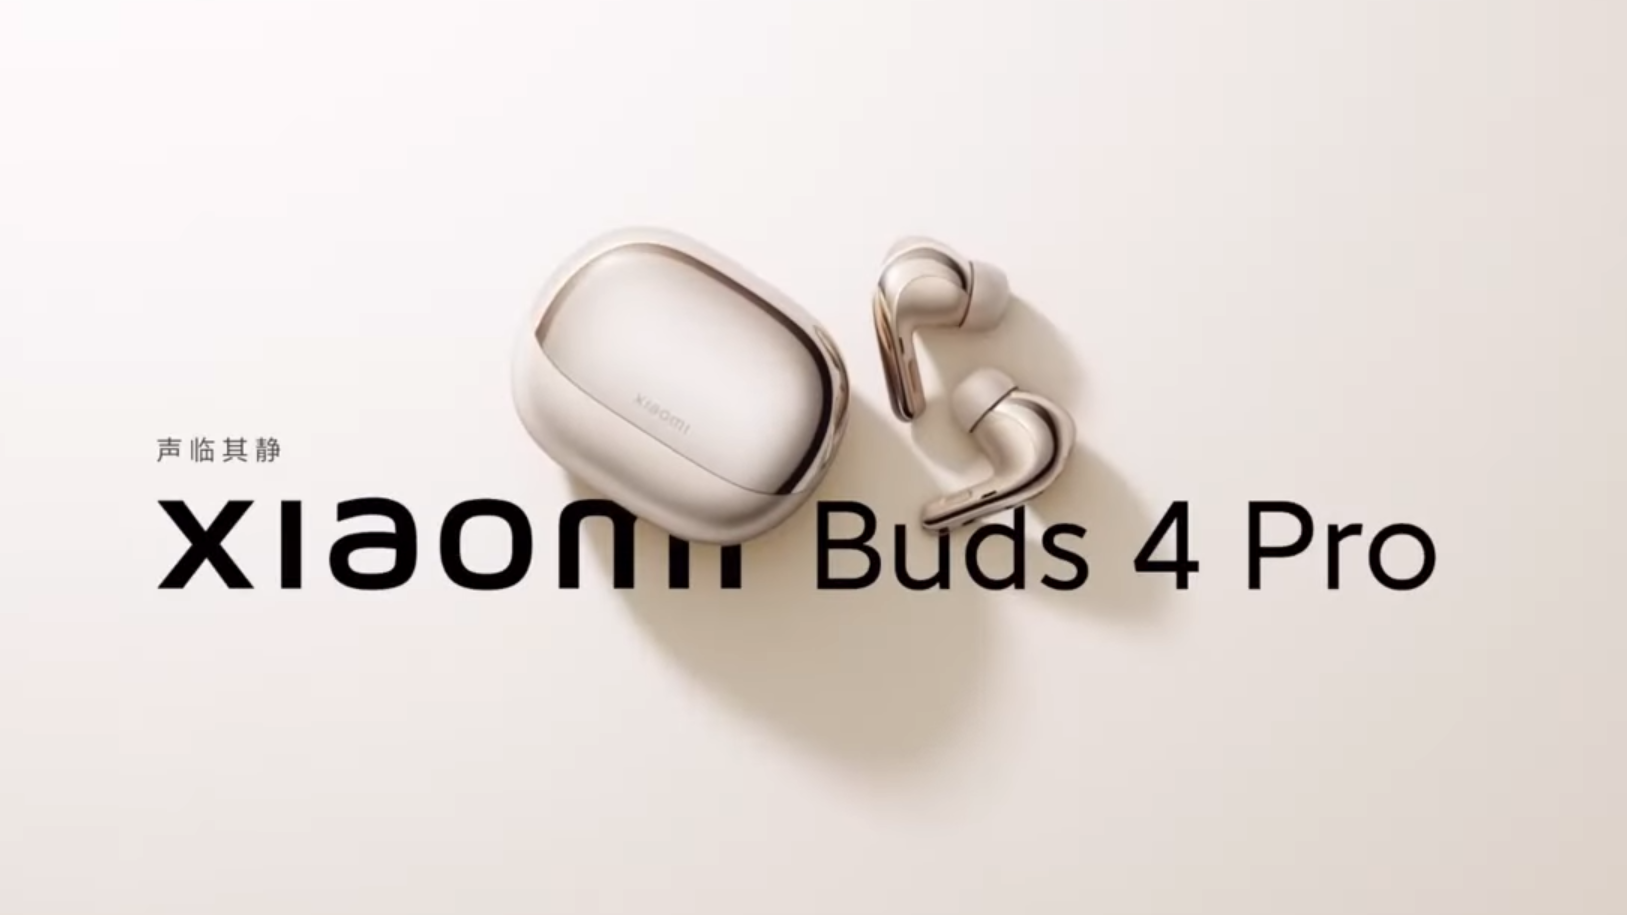 Xiaomi Buds 4 Pro launch with Bluetooth 5.3, LHDC 4.0 support and